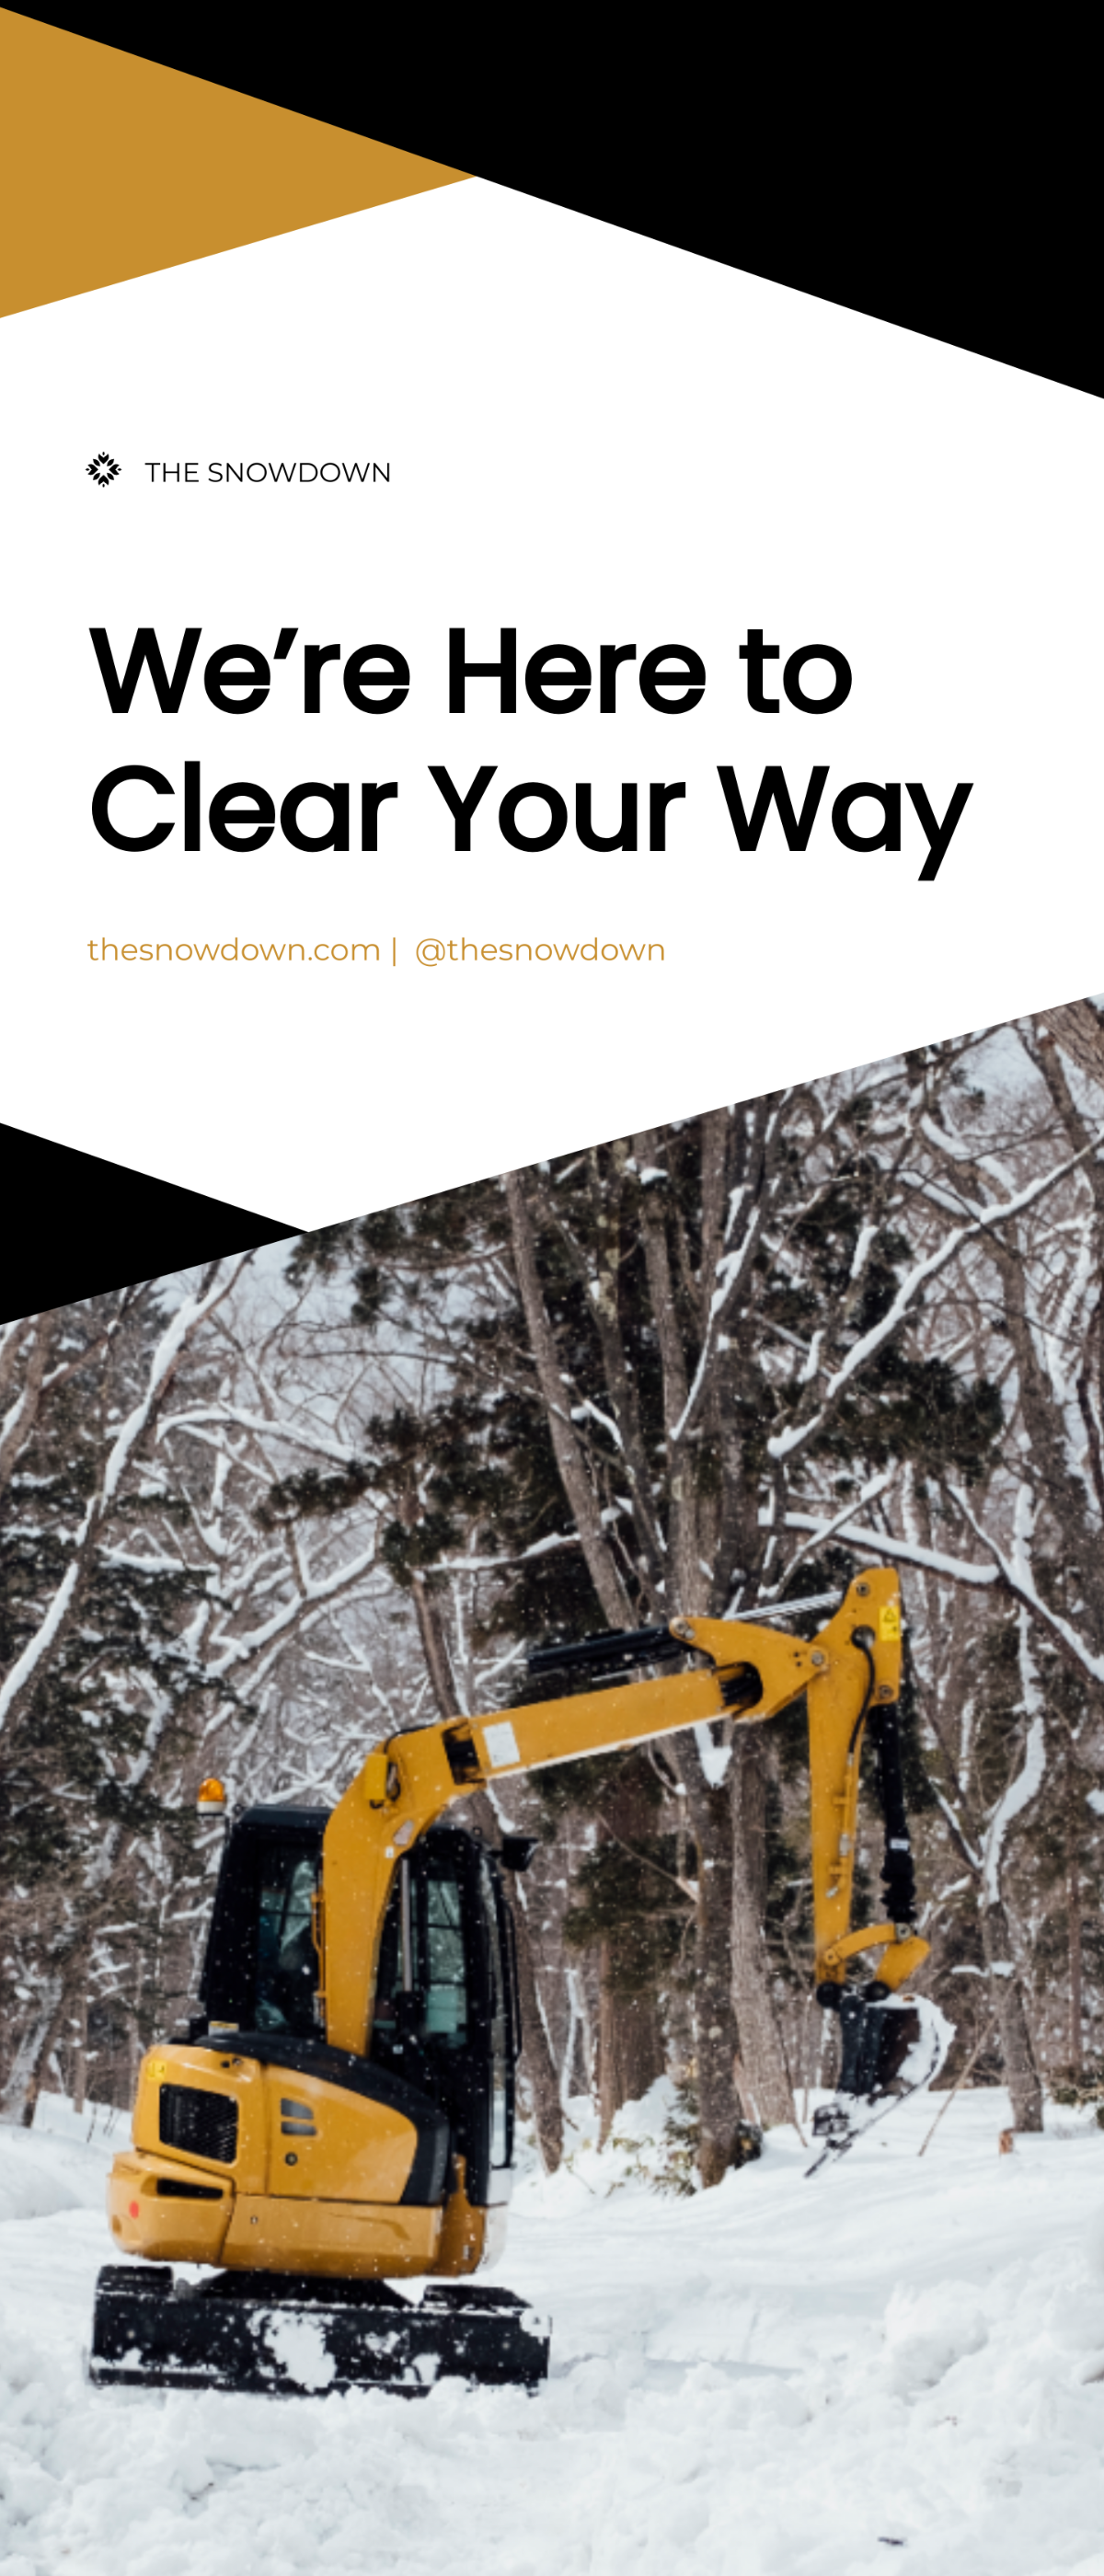 Free Snow Removal Service Roll Up Banner Template